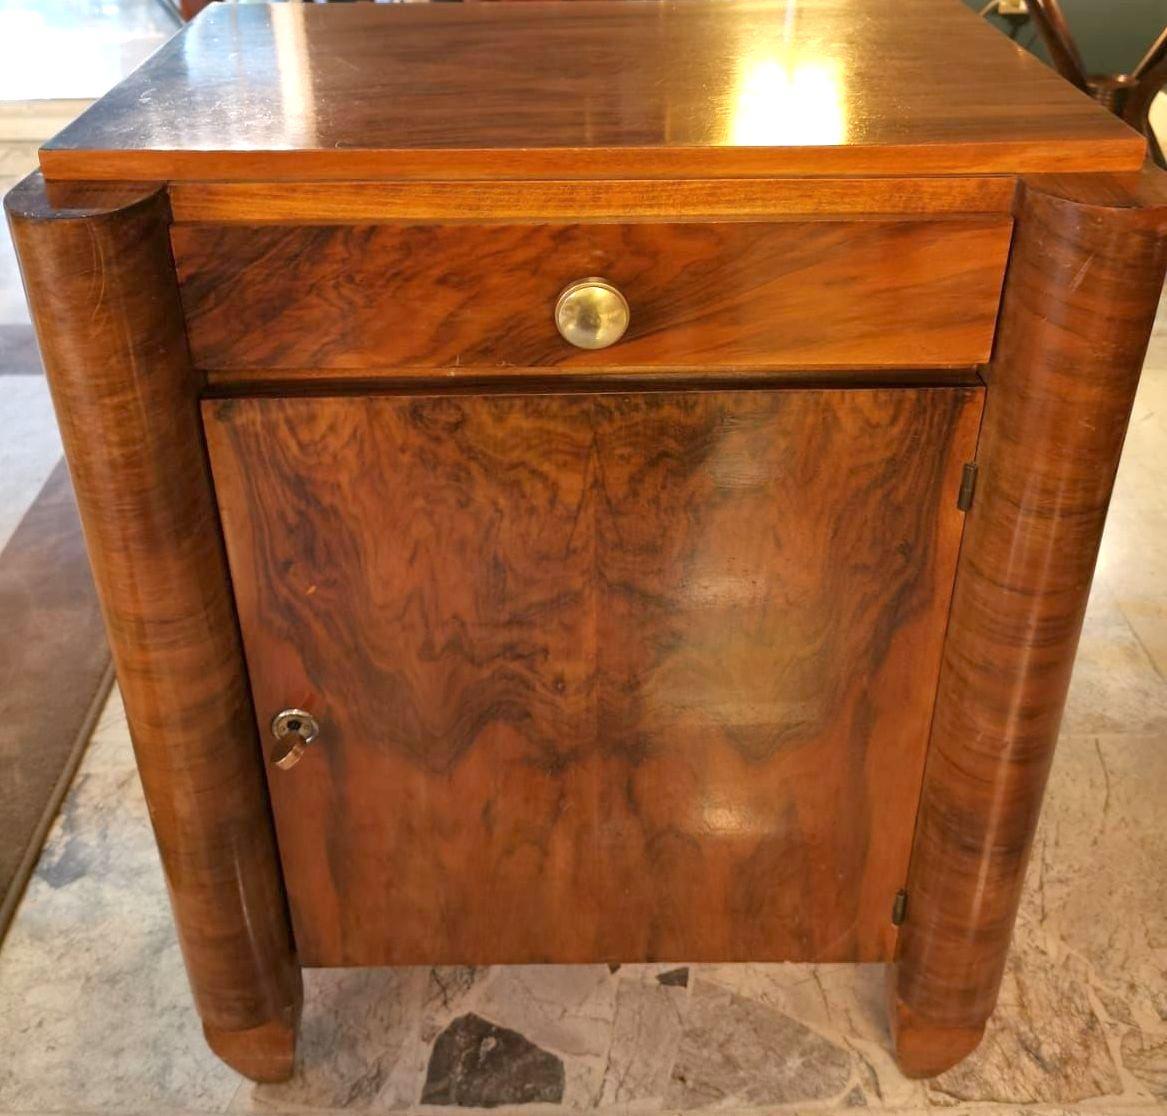 Polished Art Deco French Bedside Table in European Blond Walnut, 1930